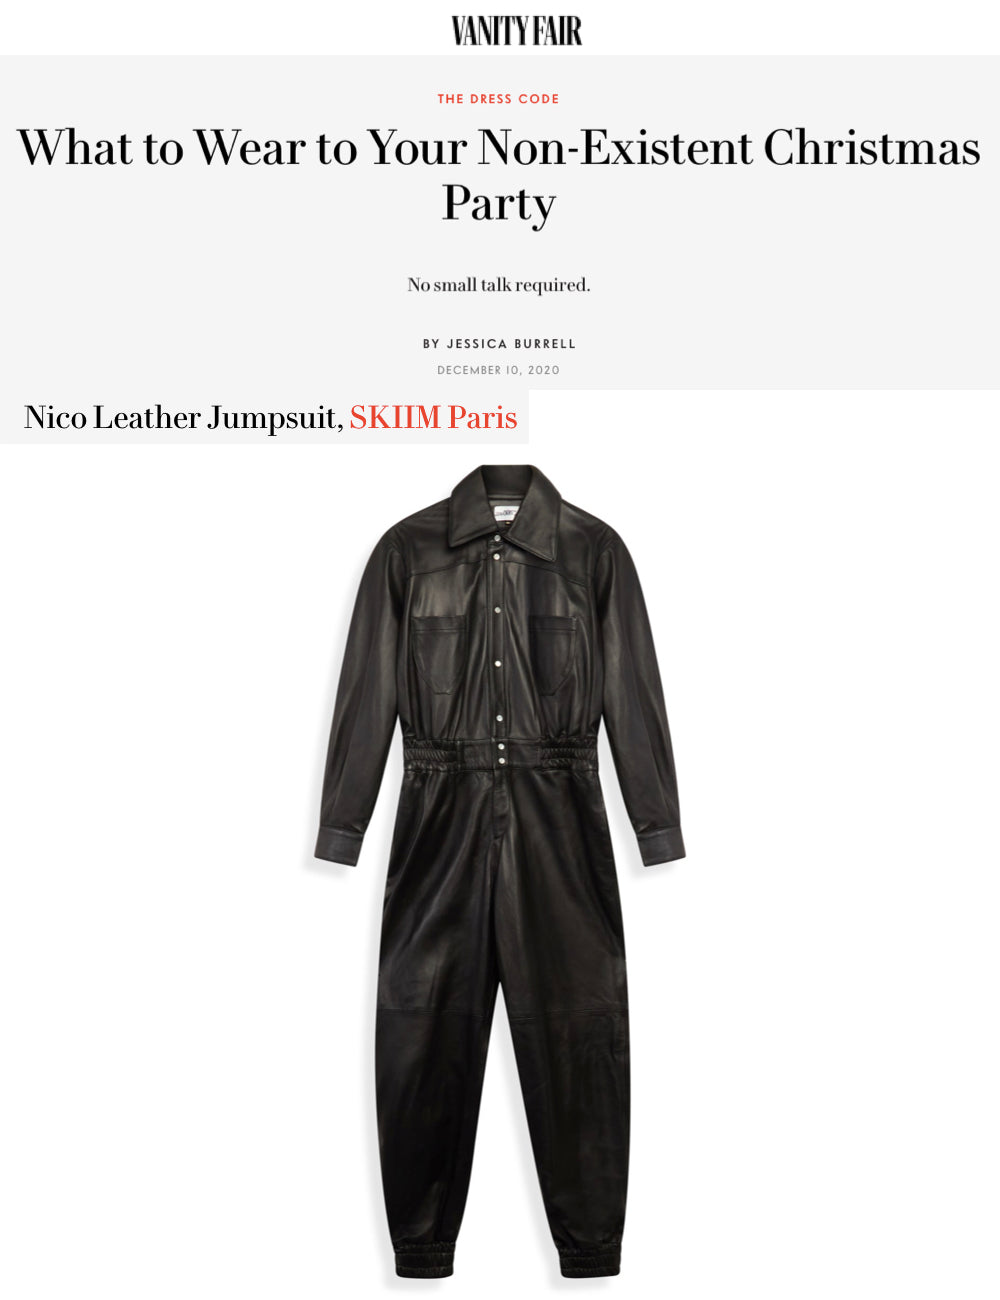 Our NICO Jumpsuit featured in Vanity Fair's: "What to wear to your non-existent Christmas party"